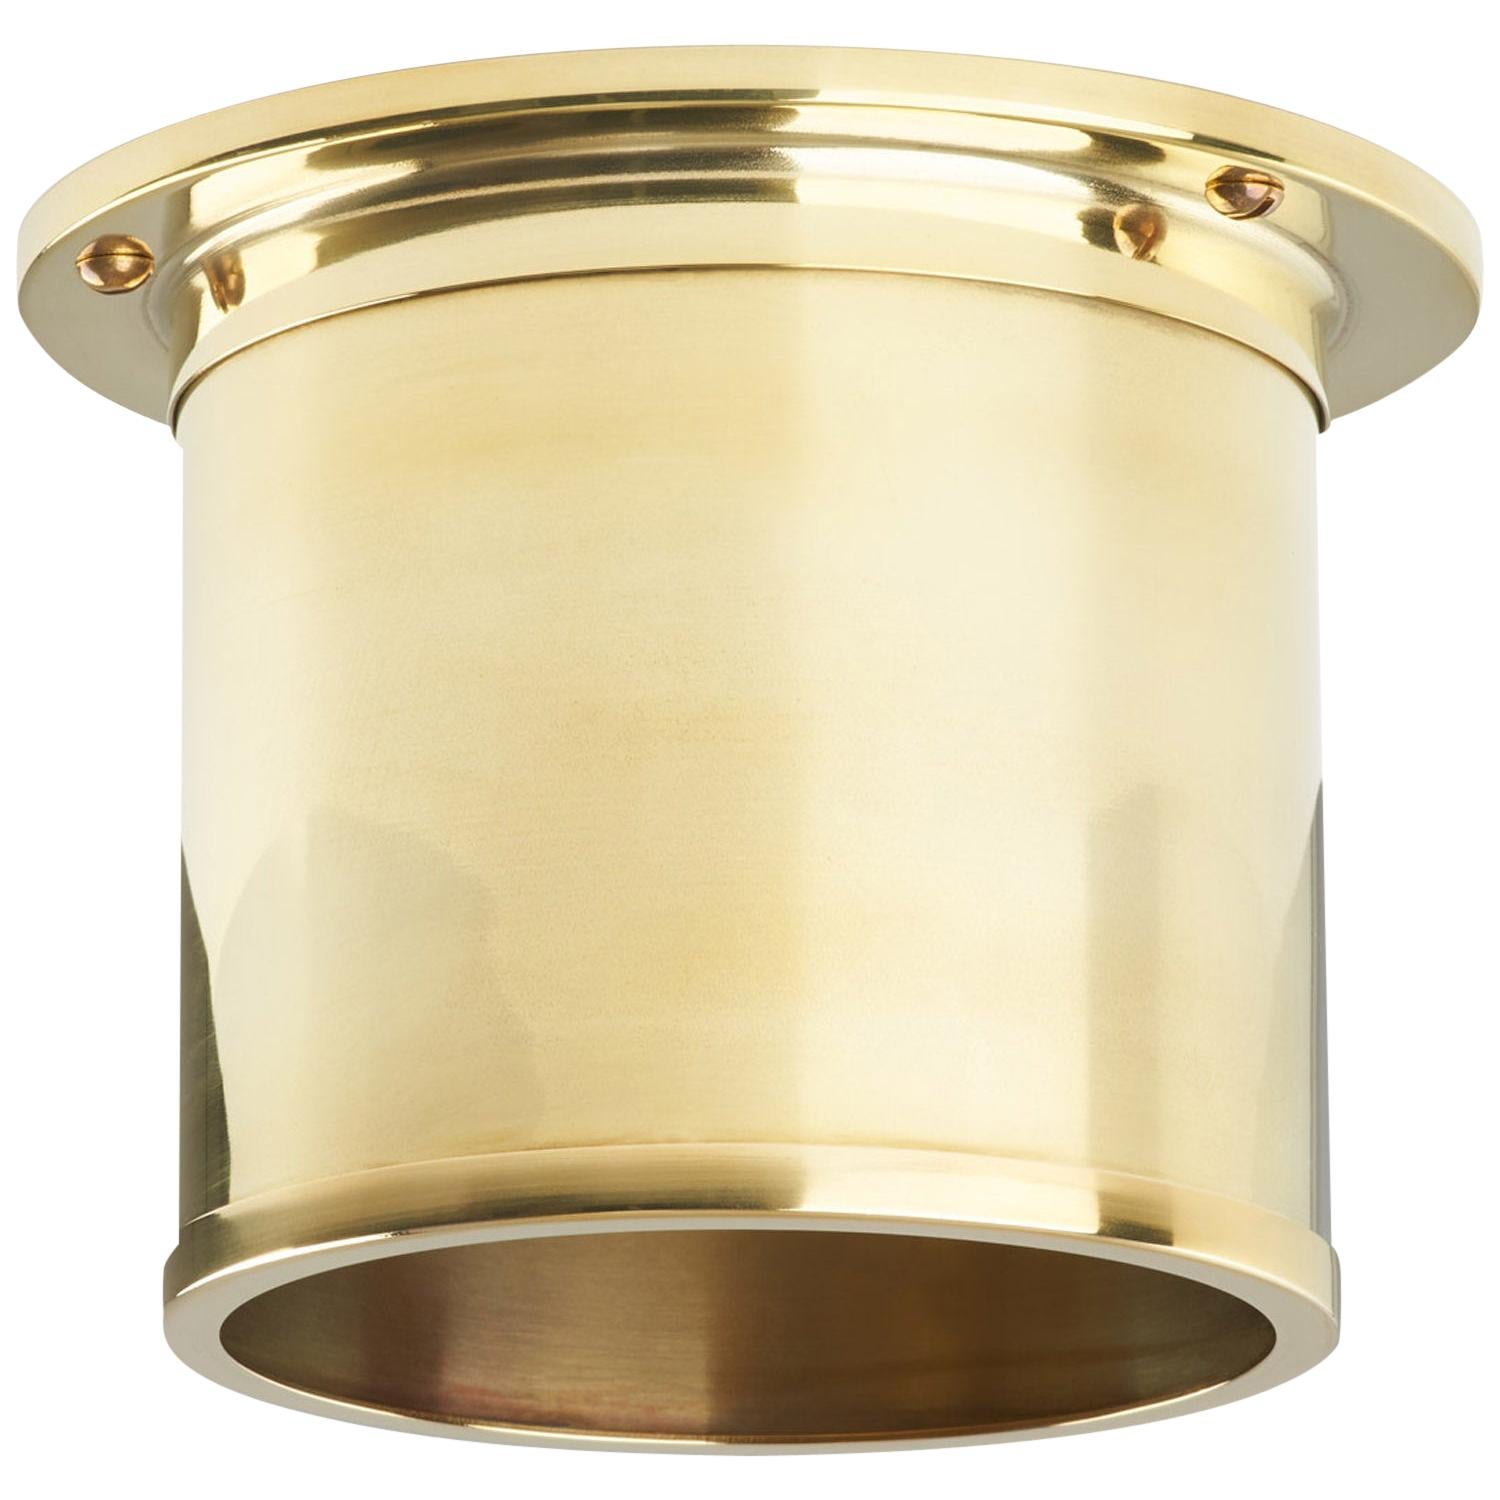 Compton Spot Diffuser, Polished Brass Recessed Spot Light Shade - Shade Only No For Sale